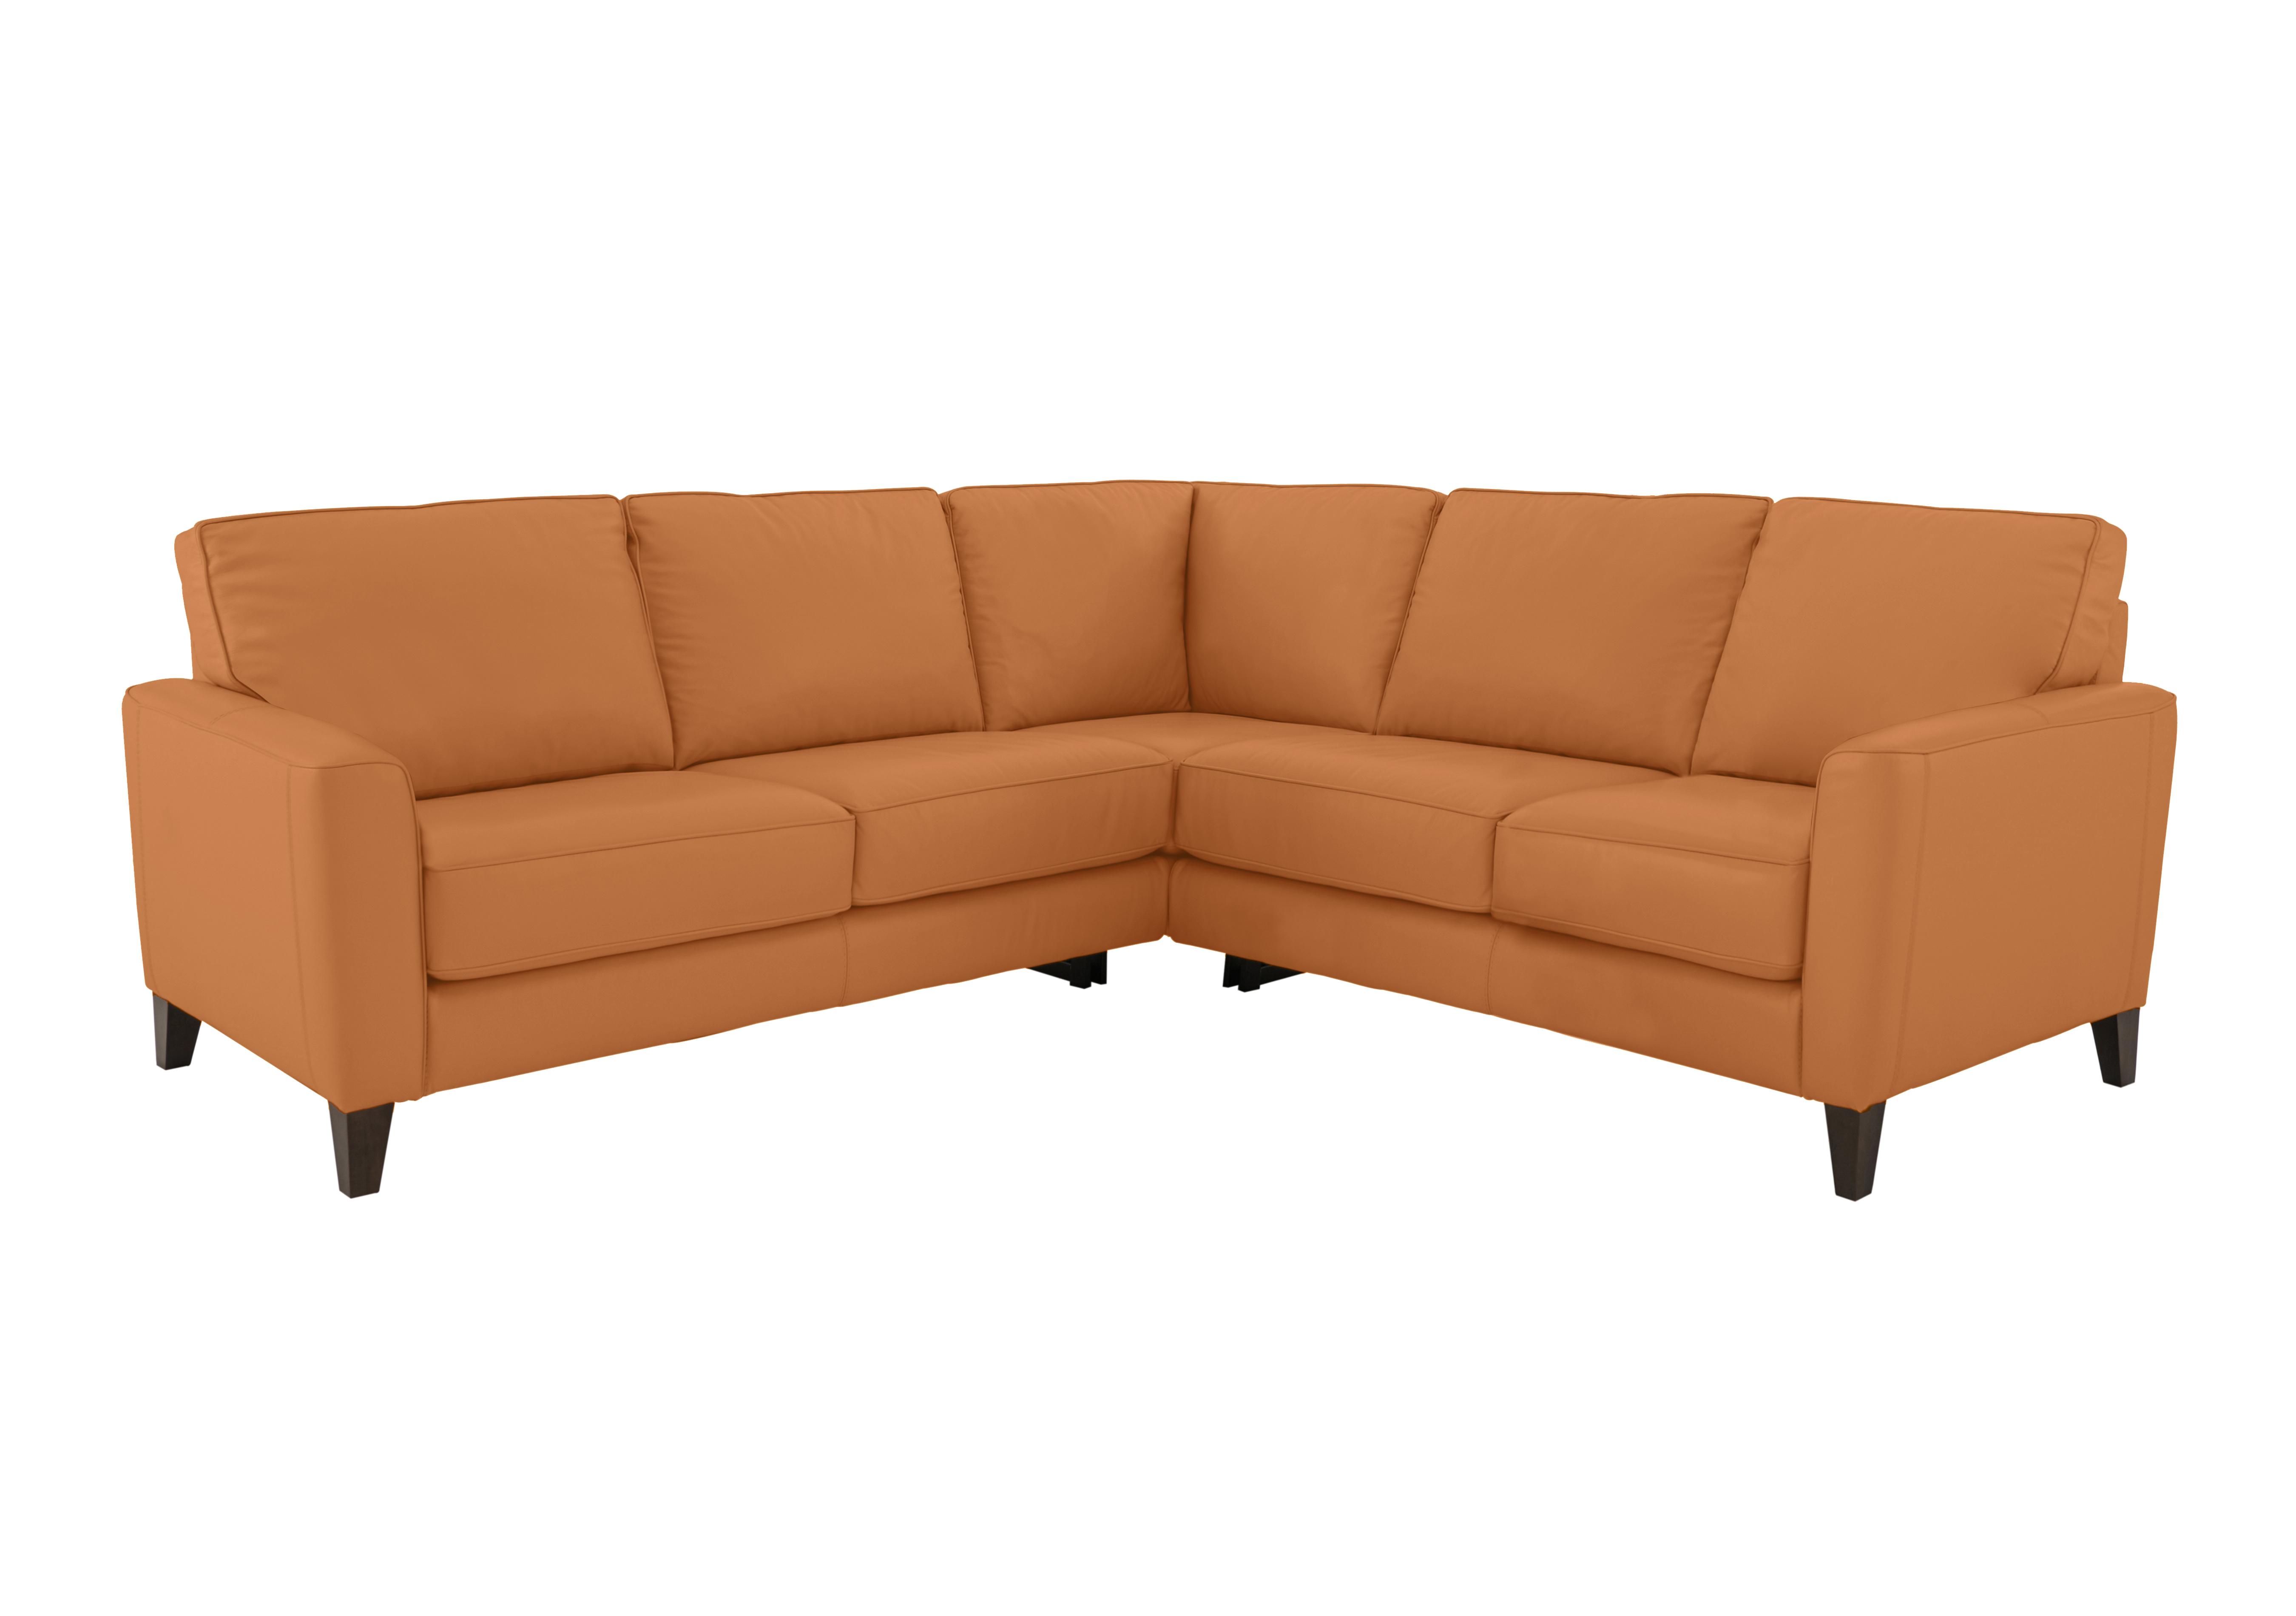 Brondby Large Leather Corner Sofa in Bv-335e Honey Yellow on Furniture Village